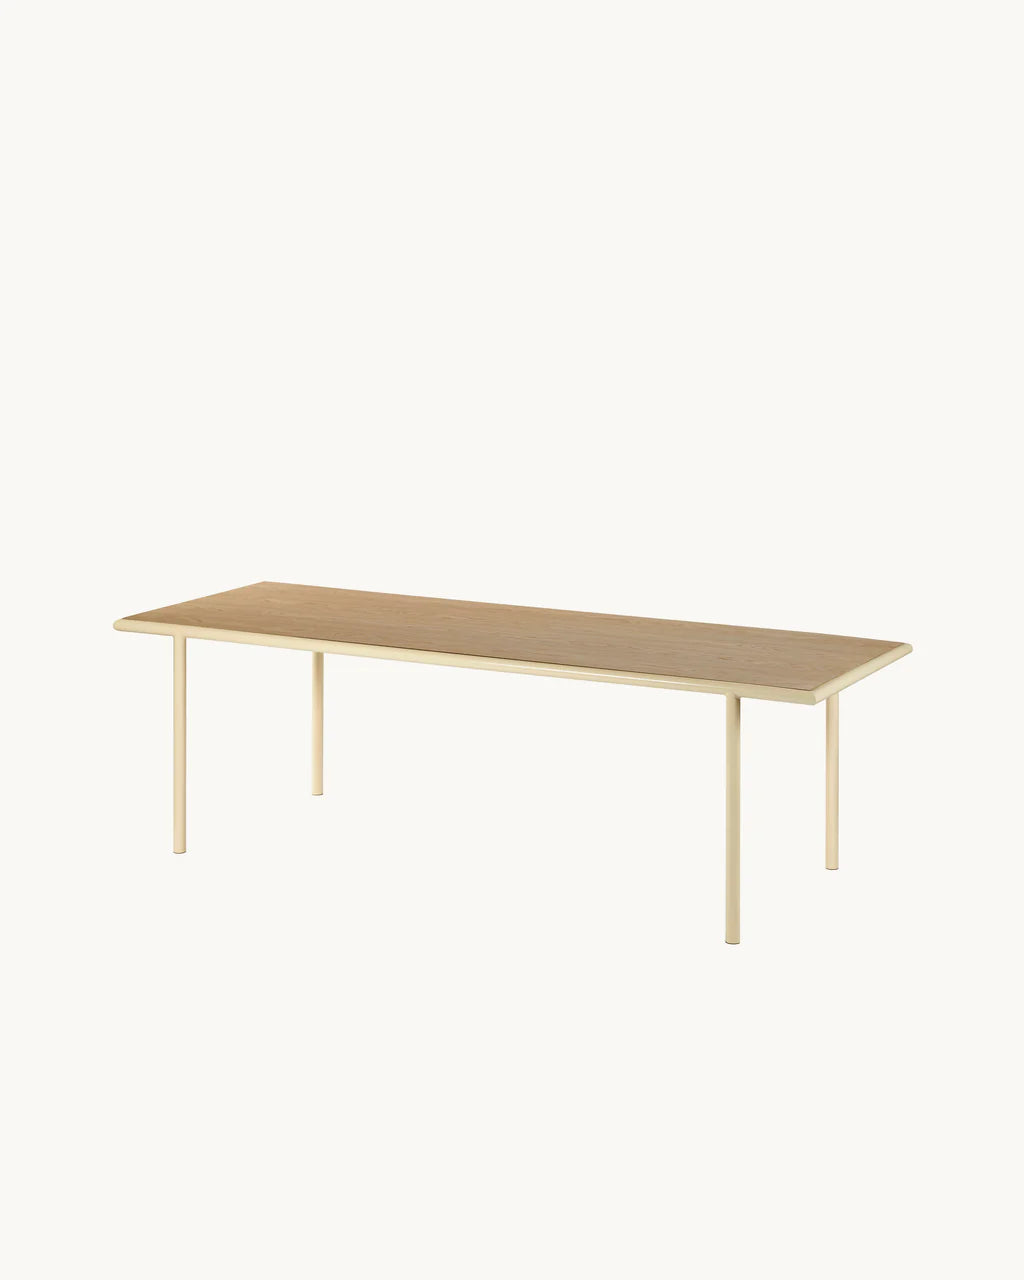 Wooden Table Rectangular M - Valerie Objects